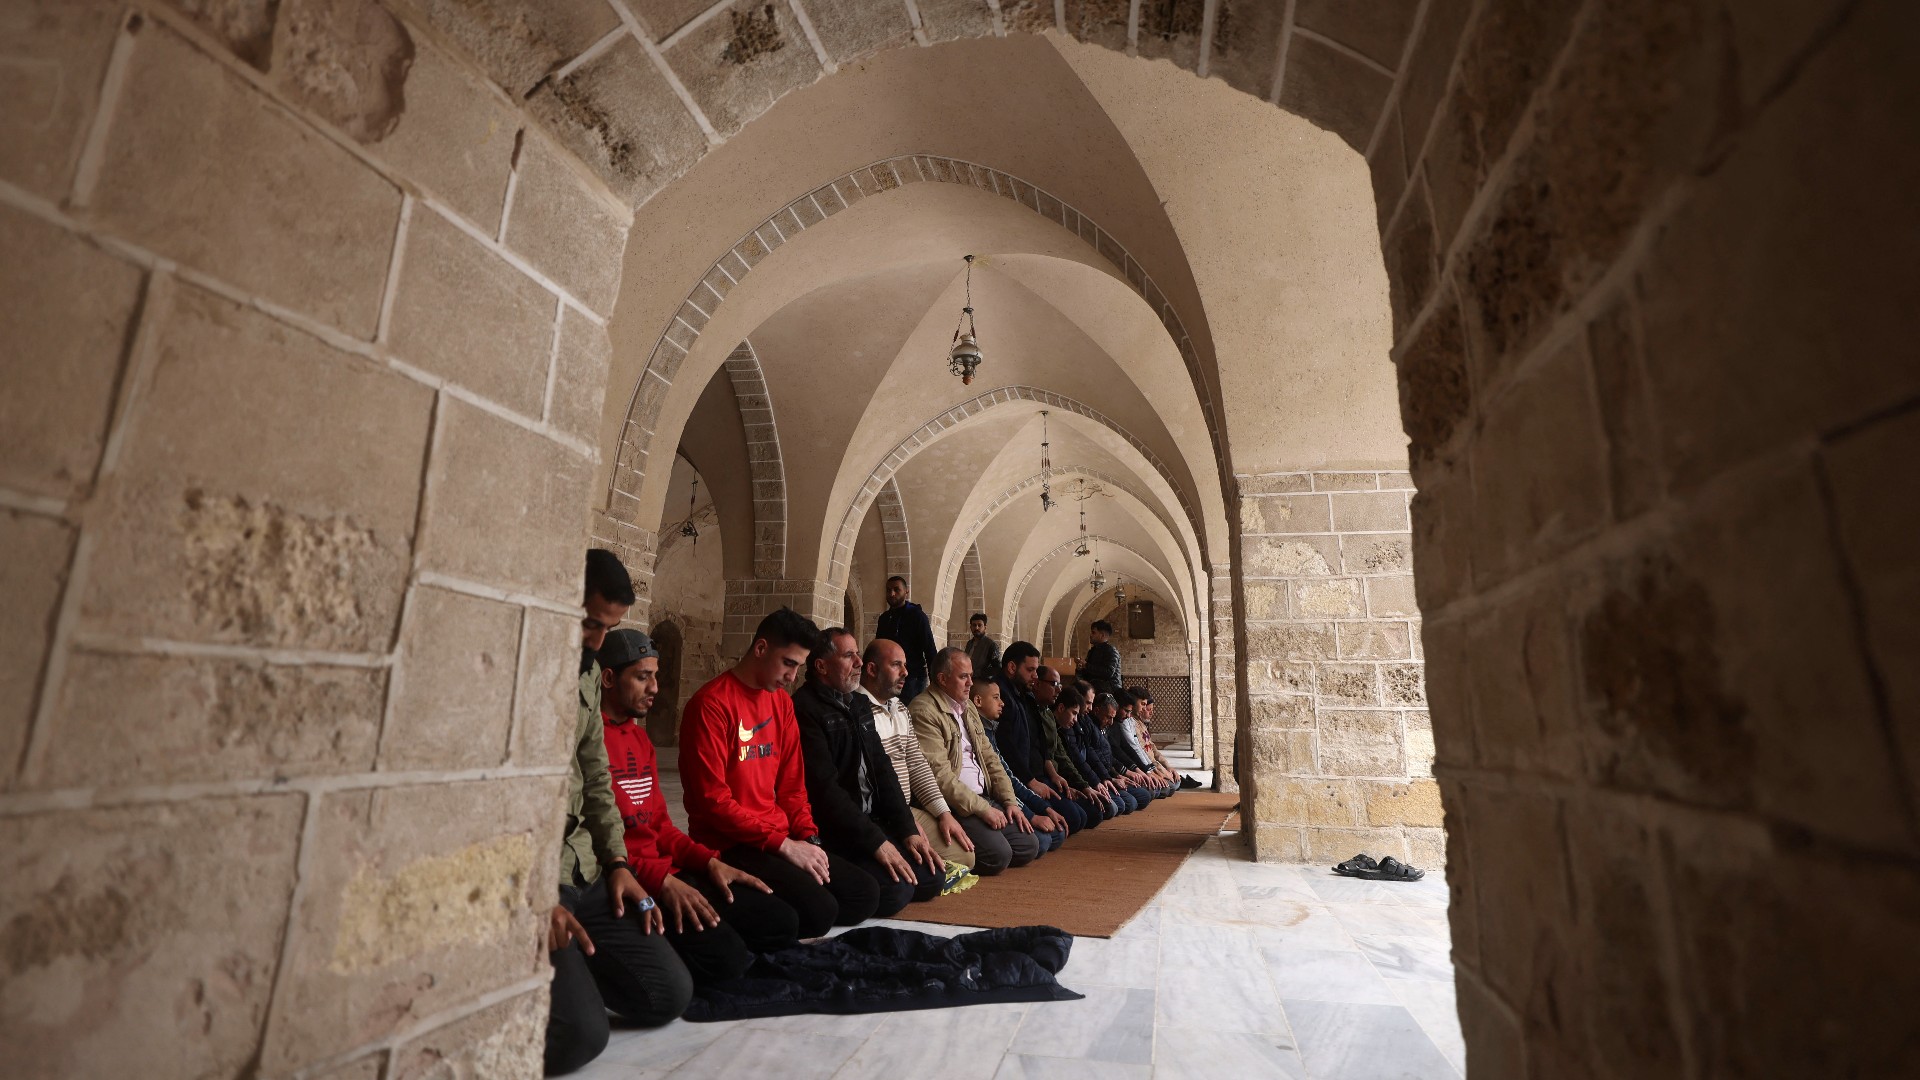 A row of men can be seen praying inside the stone archways of the Omari mosque.